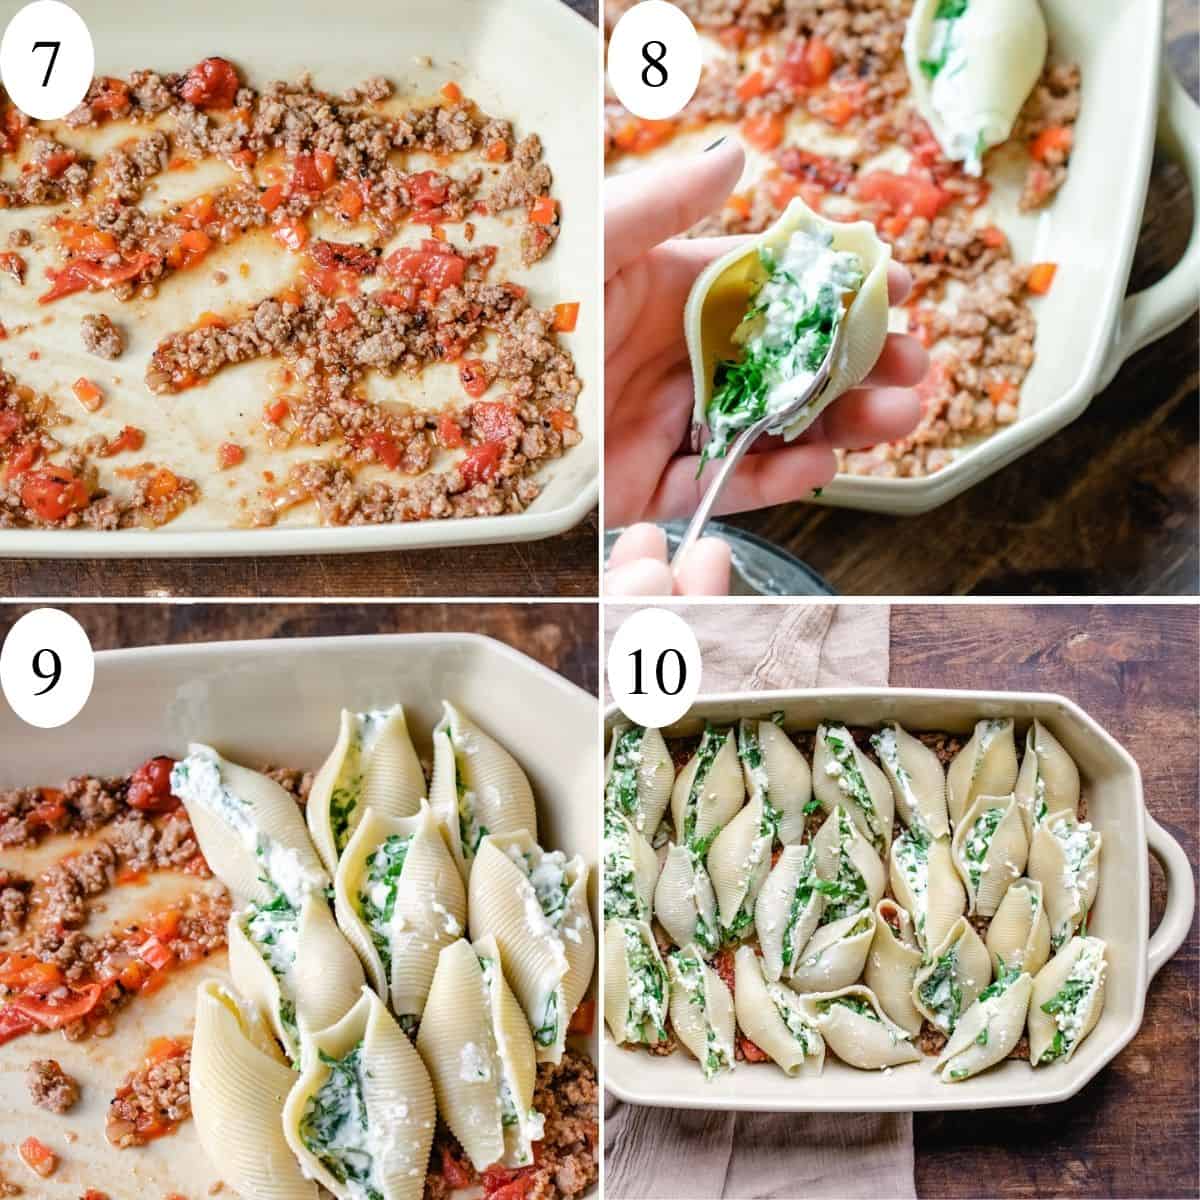 4 numbered images in a collage showing how to stuff pasta shells in a casserole dish.